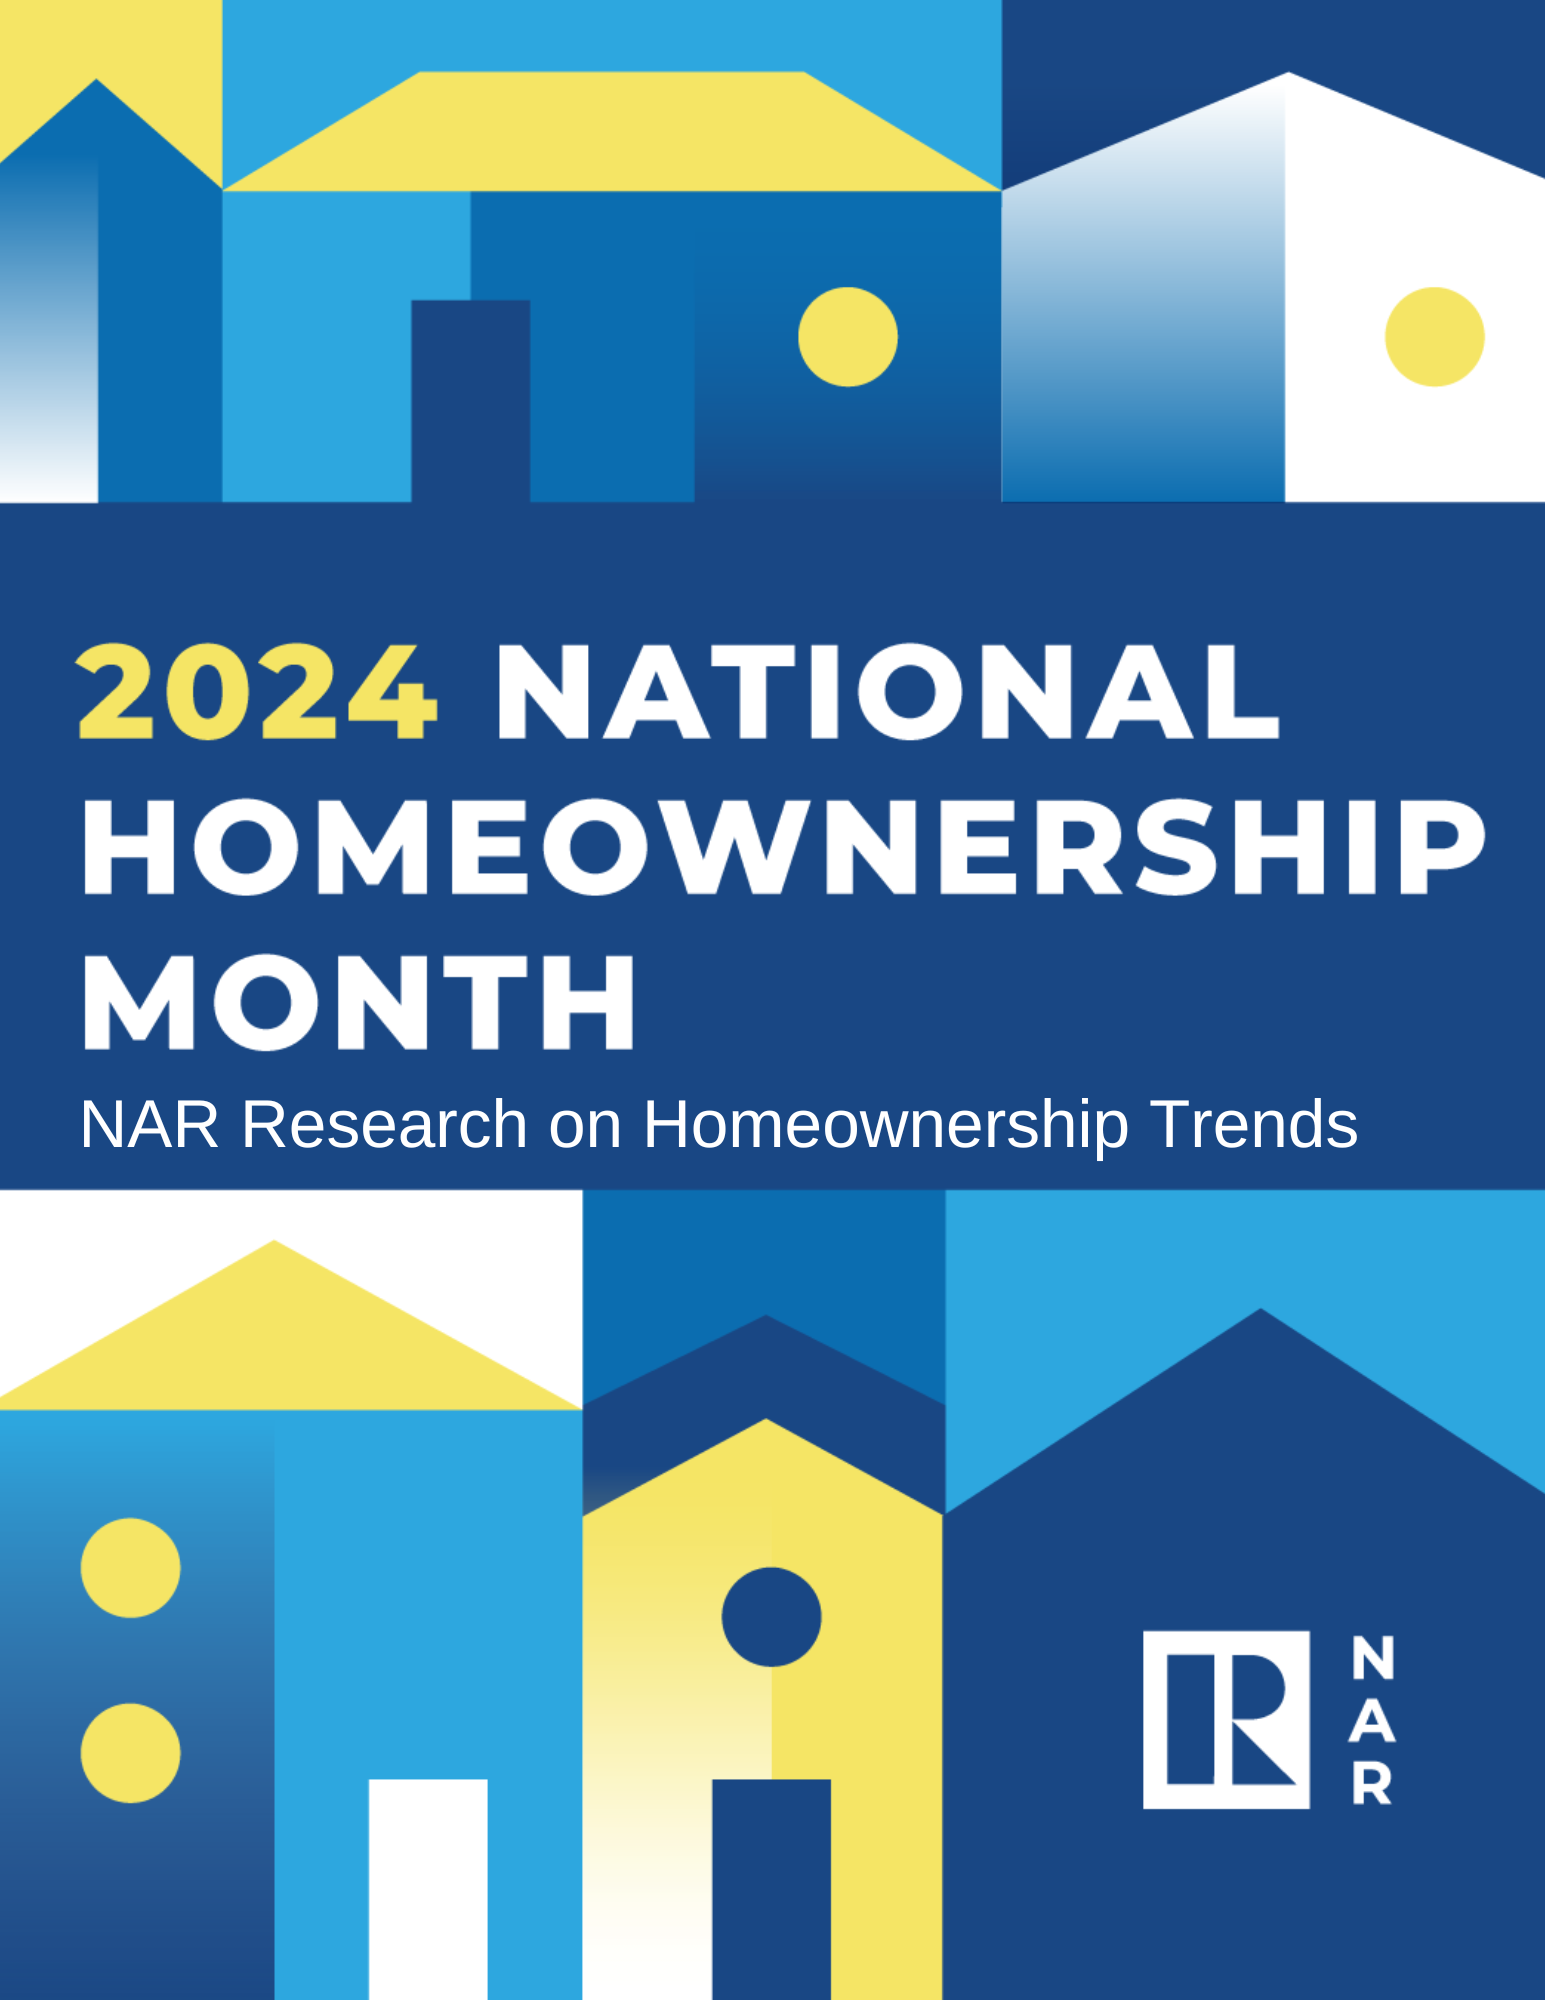 NAR Research on Homeownership Trends